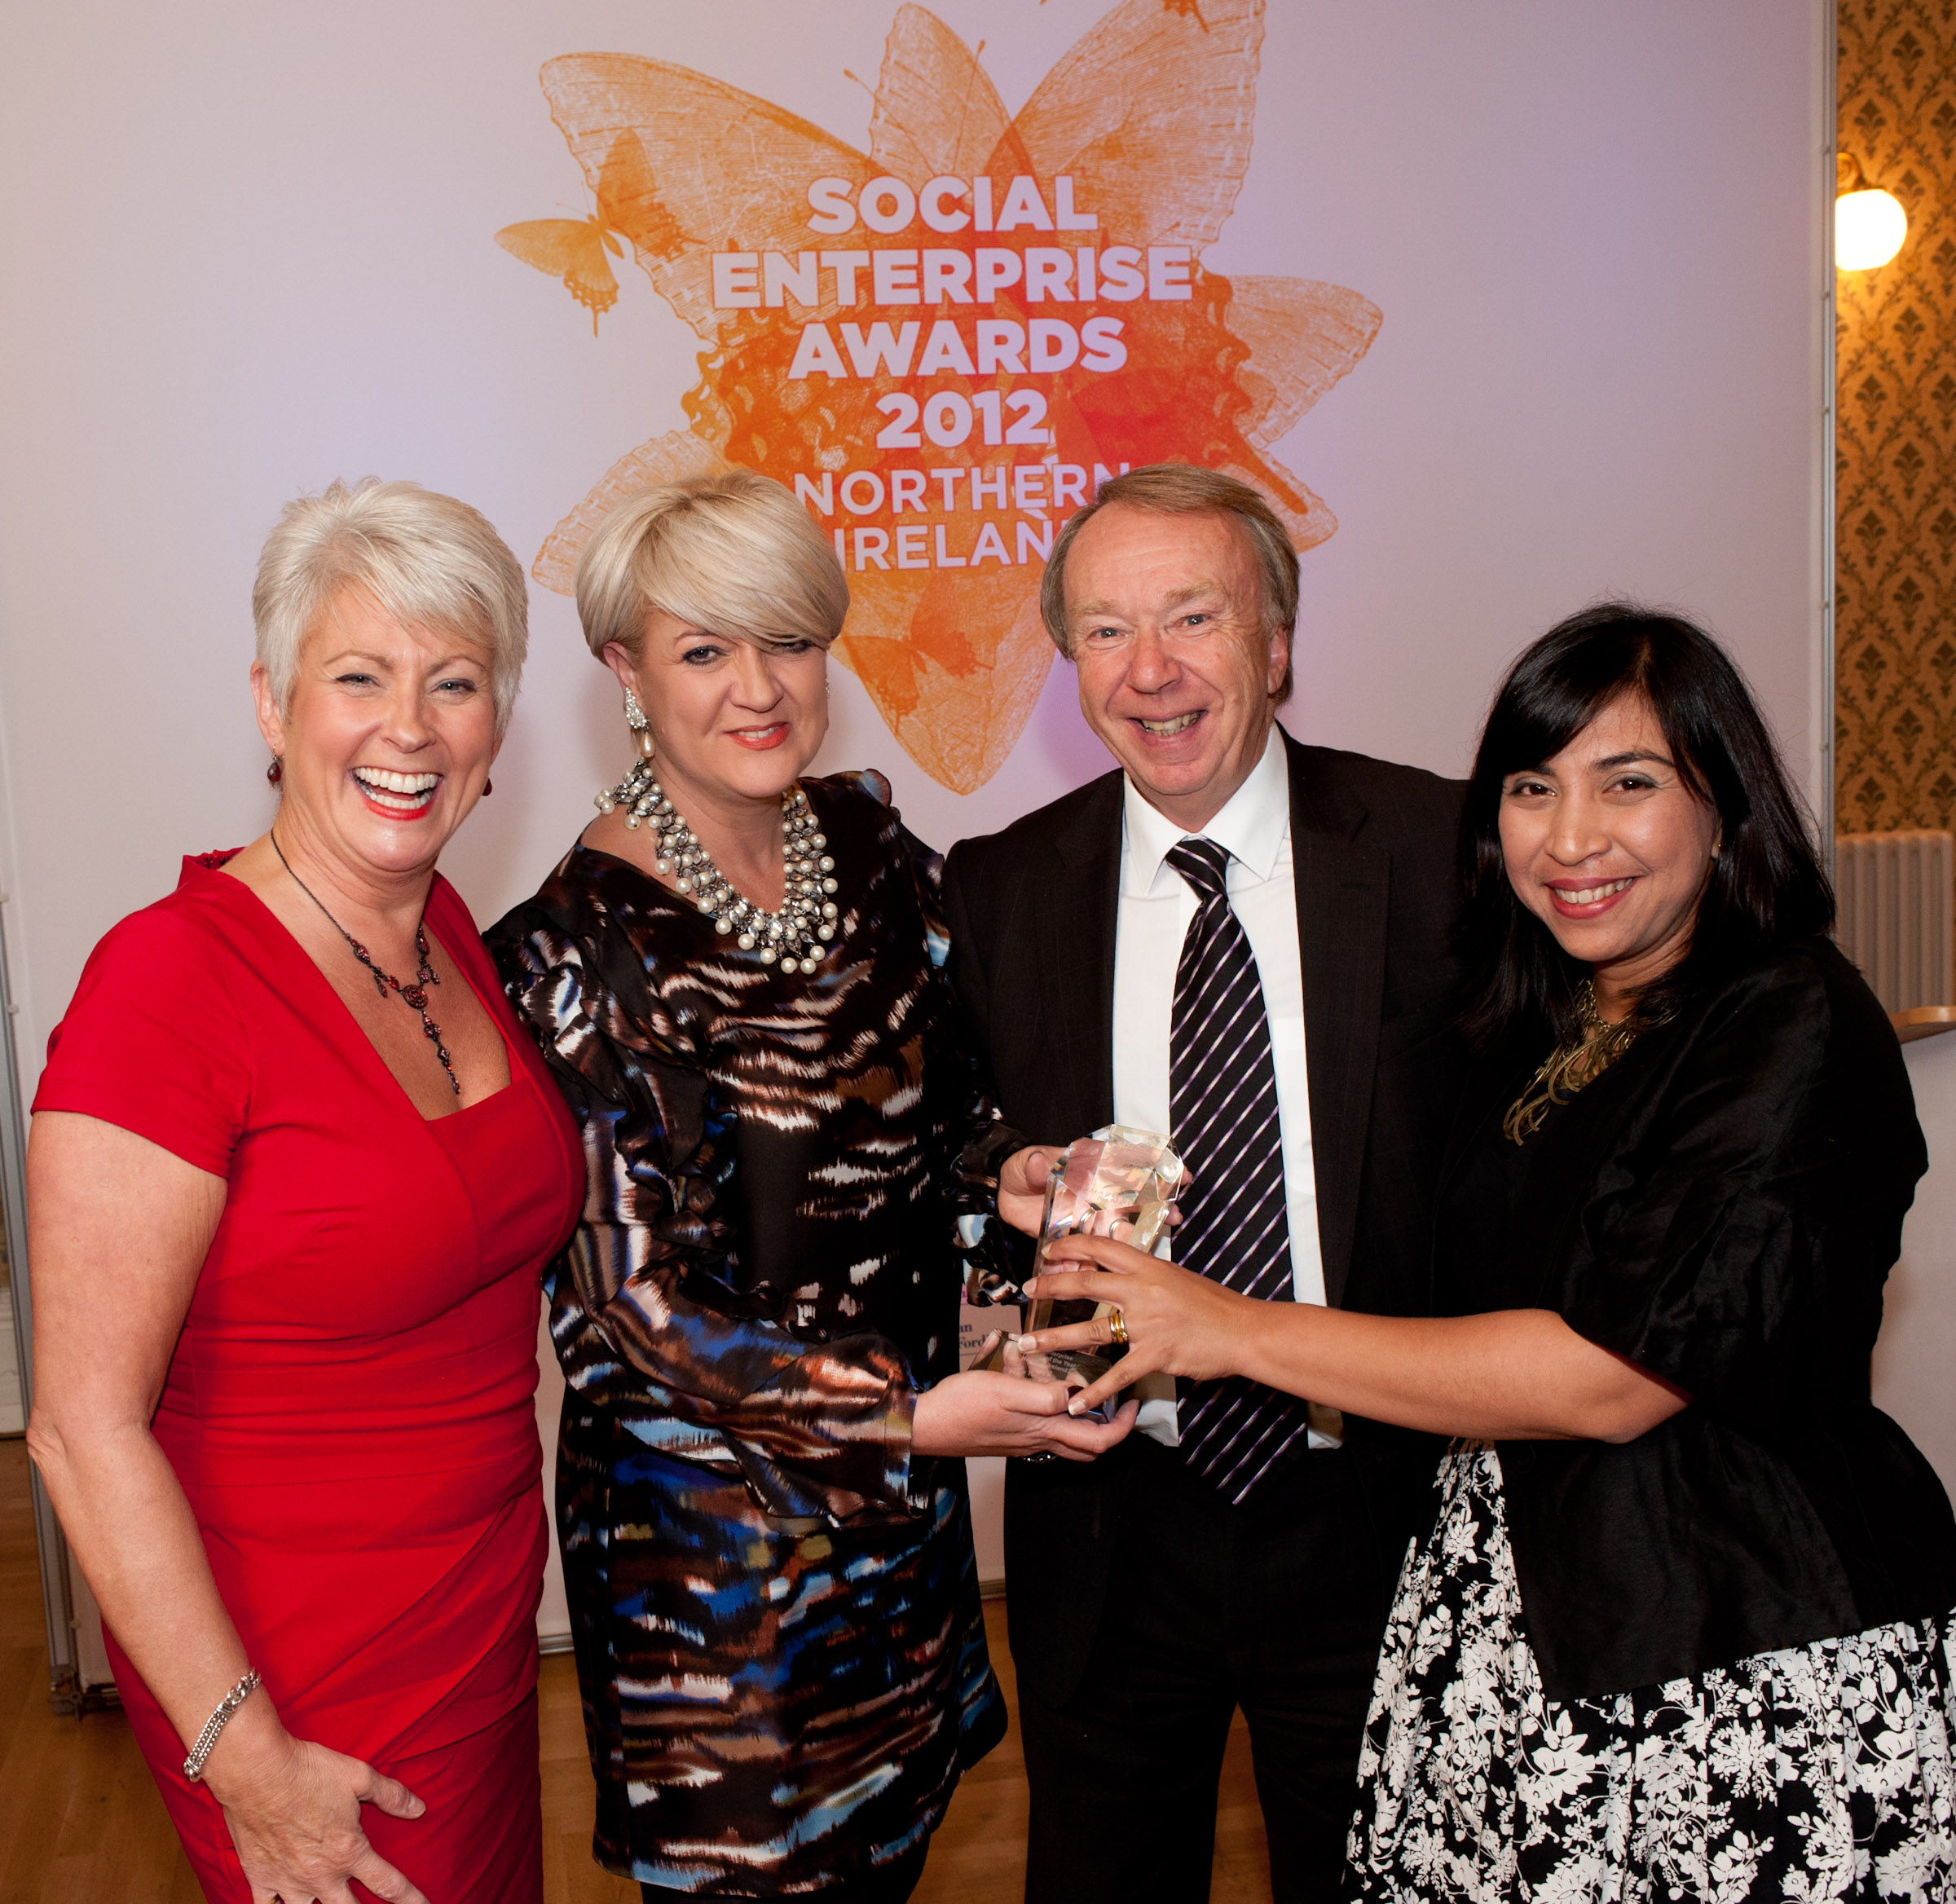 Lloyds TSB Foundation for NI recognised for supporting Social Enterprises